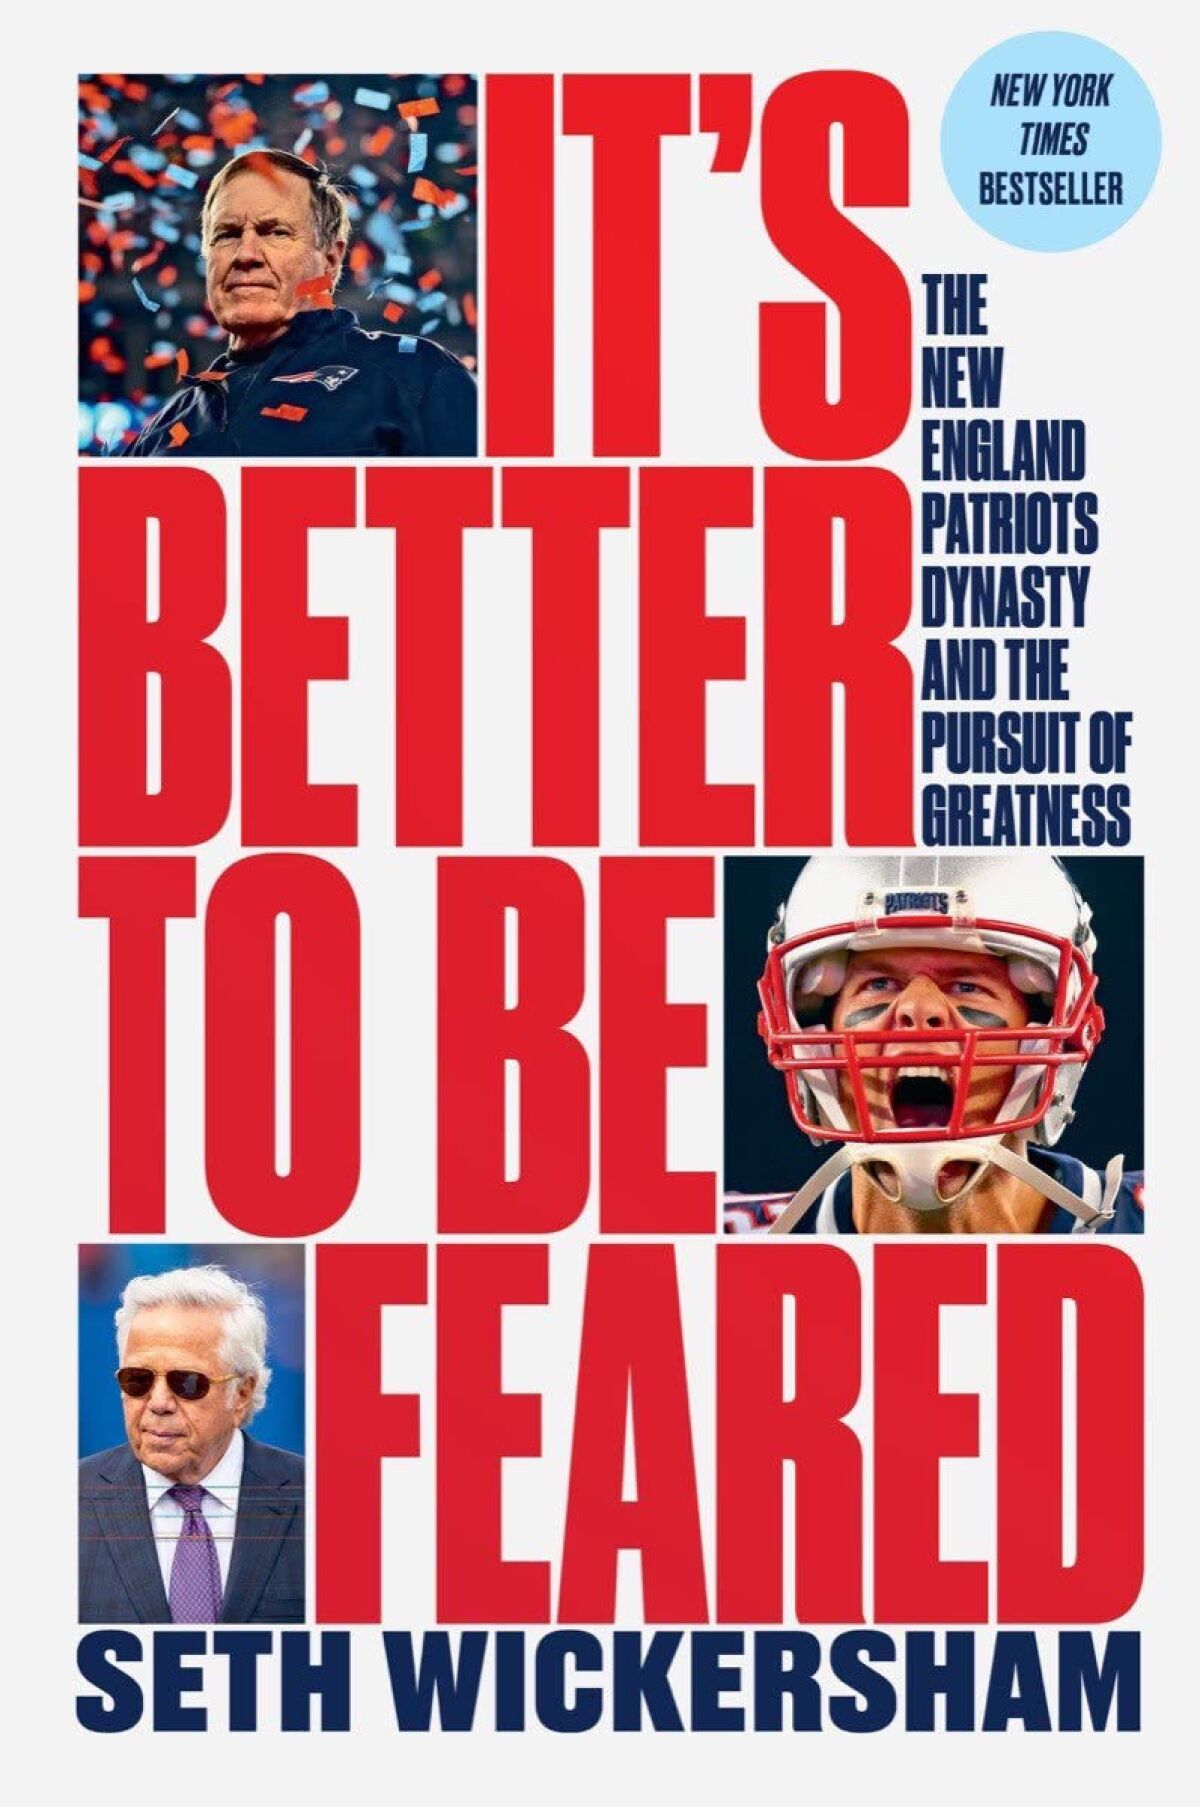 "It's Better to Be Feared: The New England Patriots Dynasty and the Pursuit of Greatness" by Seth Wickersham